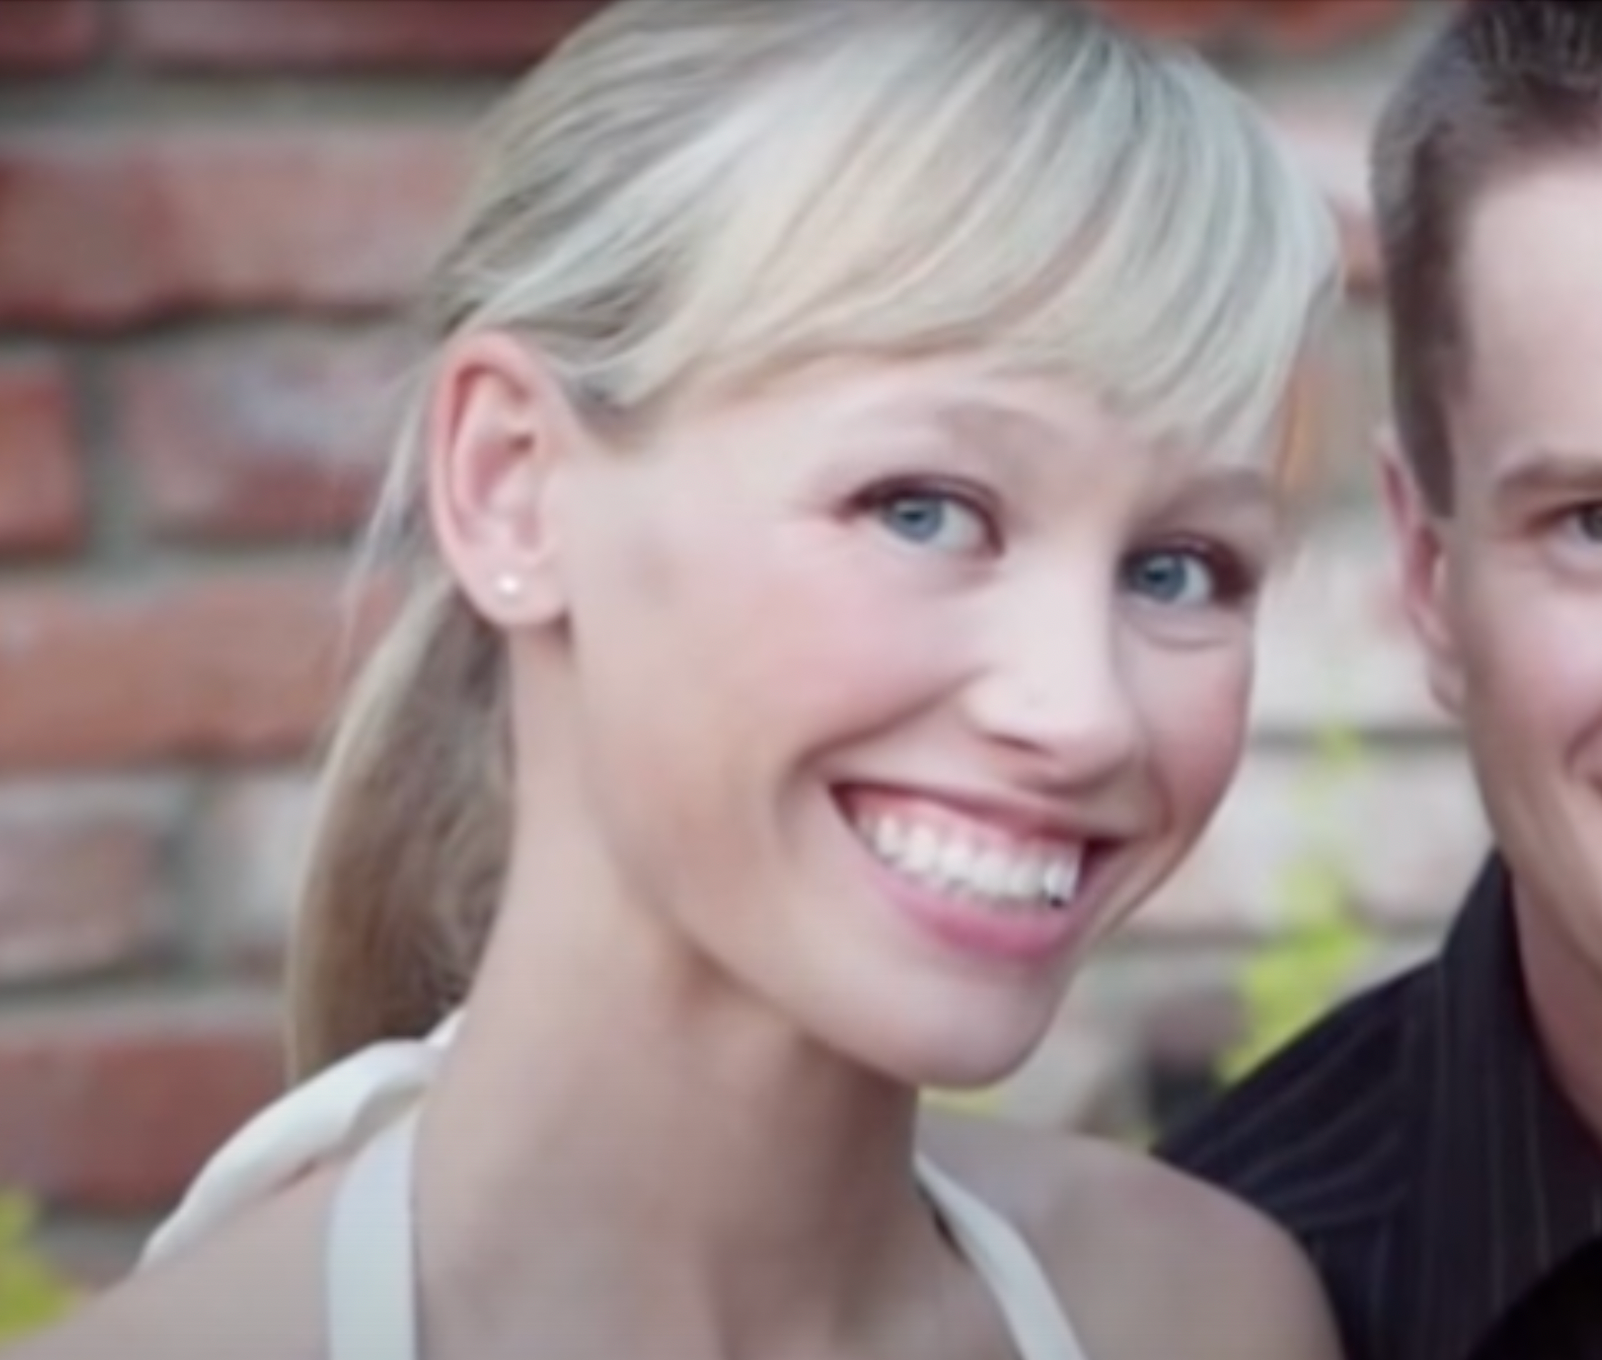 Sherri Papini has been arrested and charged with fabricating her own abduction in 2016